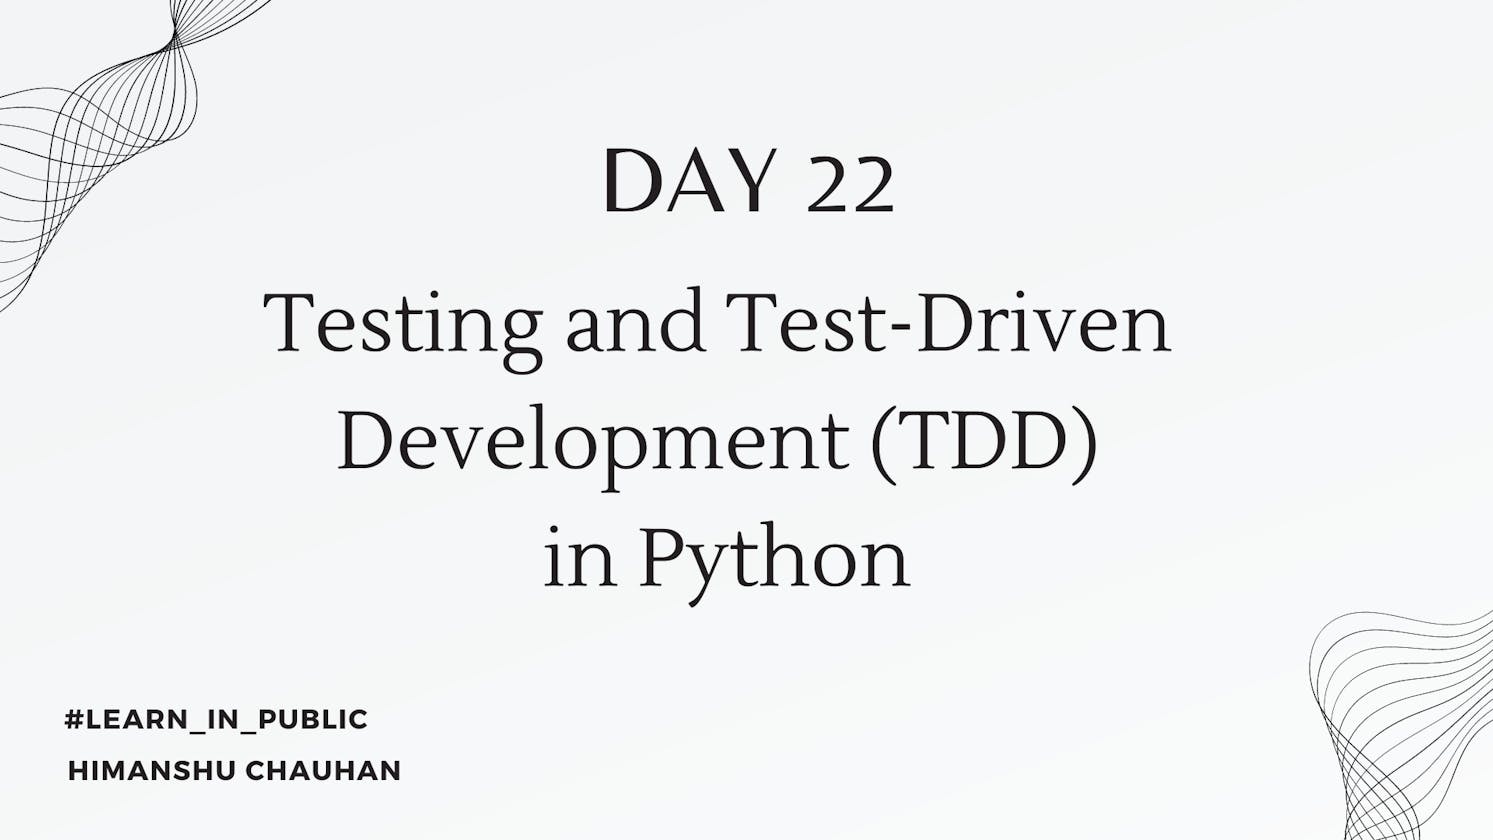 Day 22: Testing and Test-Driven Development (TDD) in Python